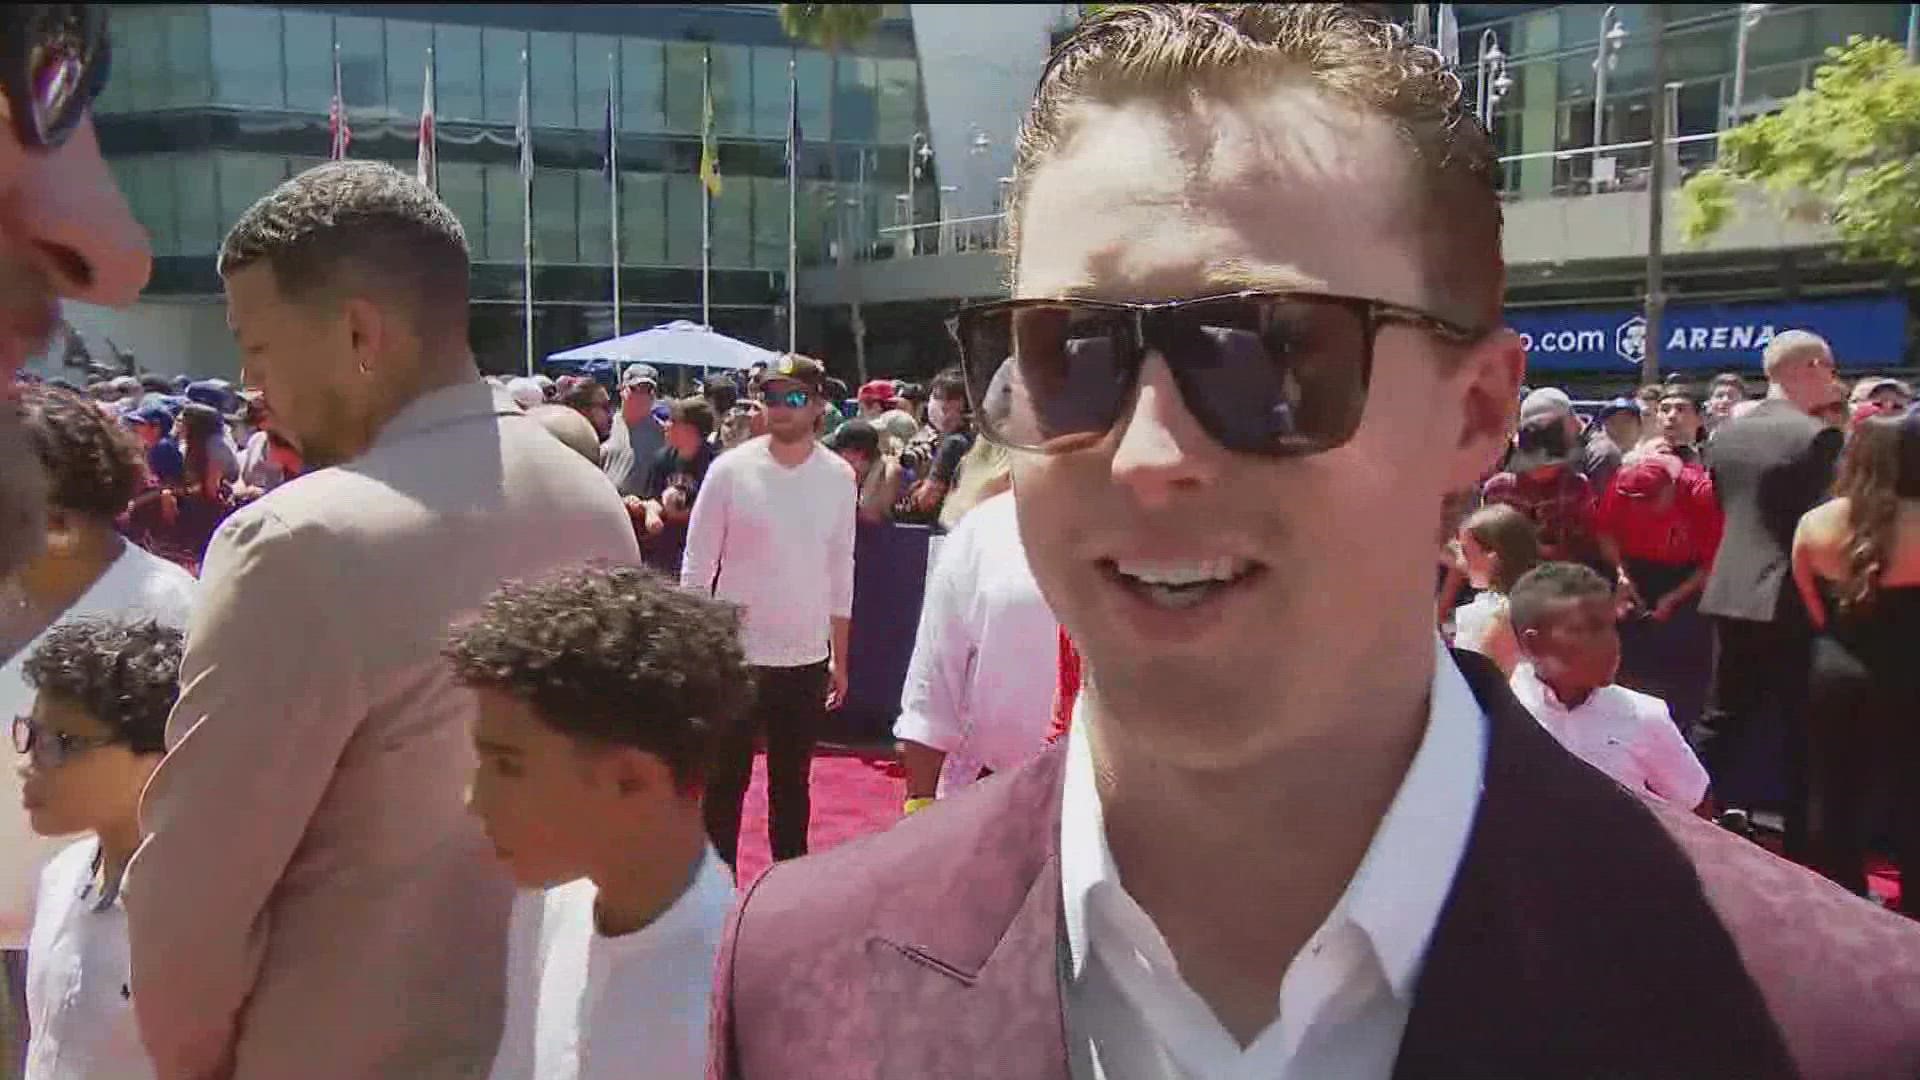 Ahead of the 2022 All-Star game Padres representatives Jake Cronenworth, Manny Machado and Joe Musgrove walked the red carpet and talked with fans.